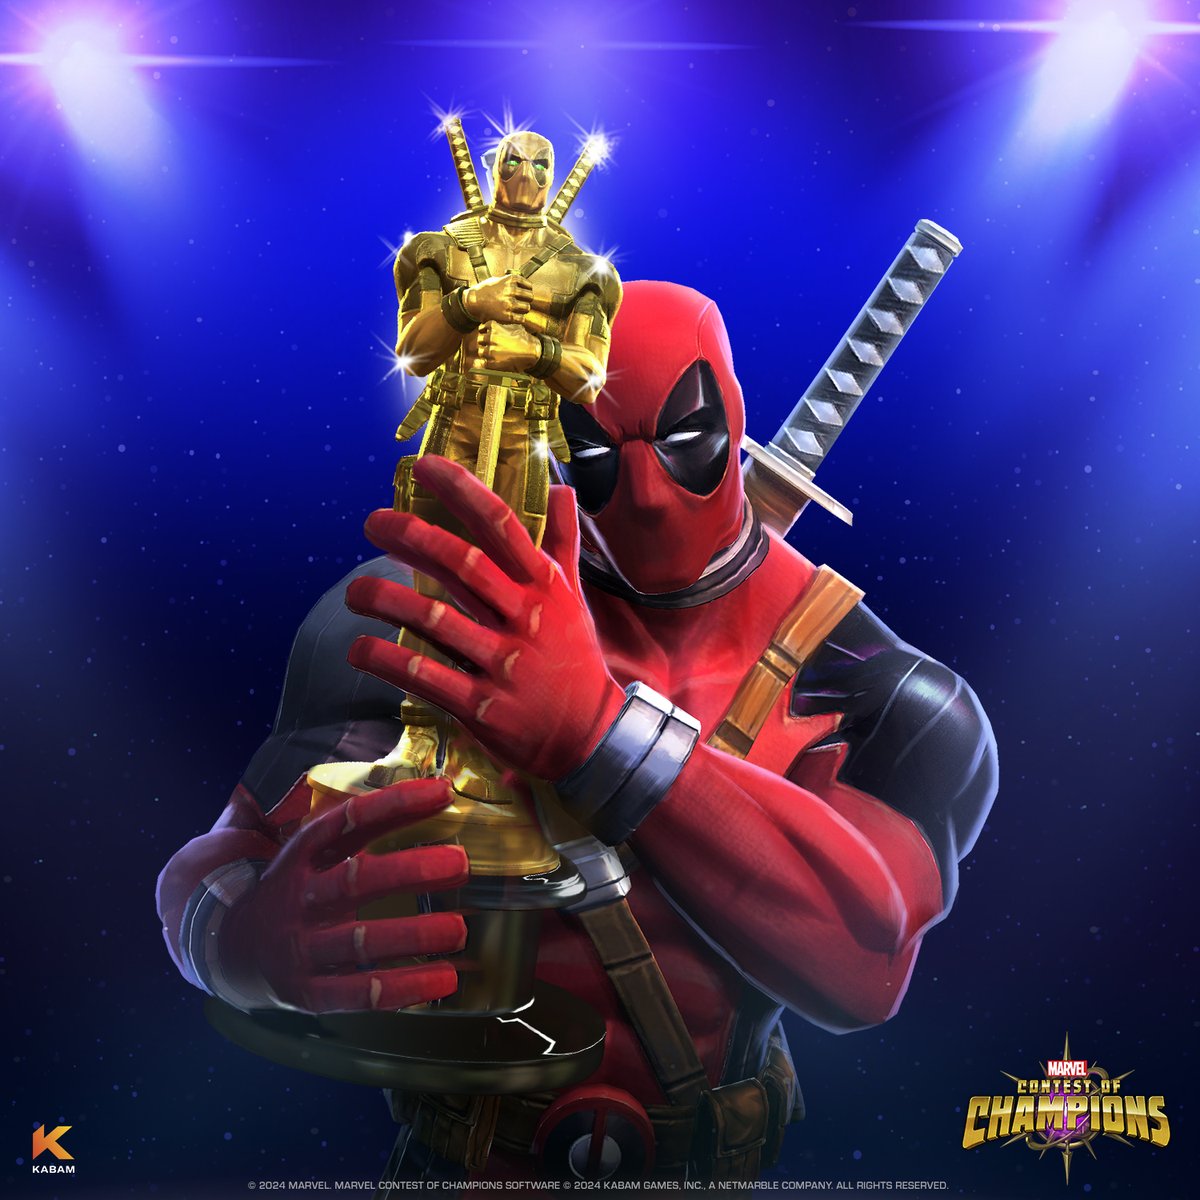 A gazillion Poolies have been traded in! If you haven't, don't miss out and return those Poolies to Deadpool before the event ends!